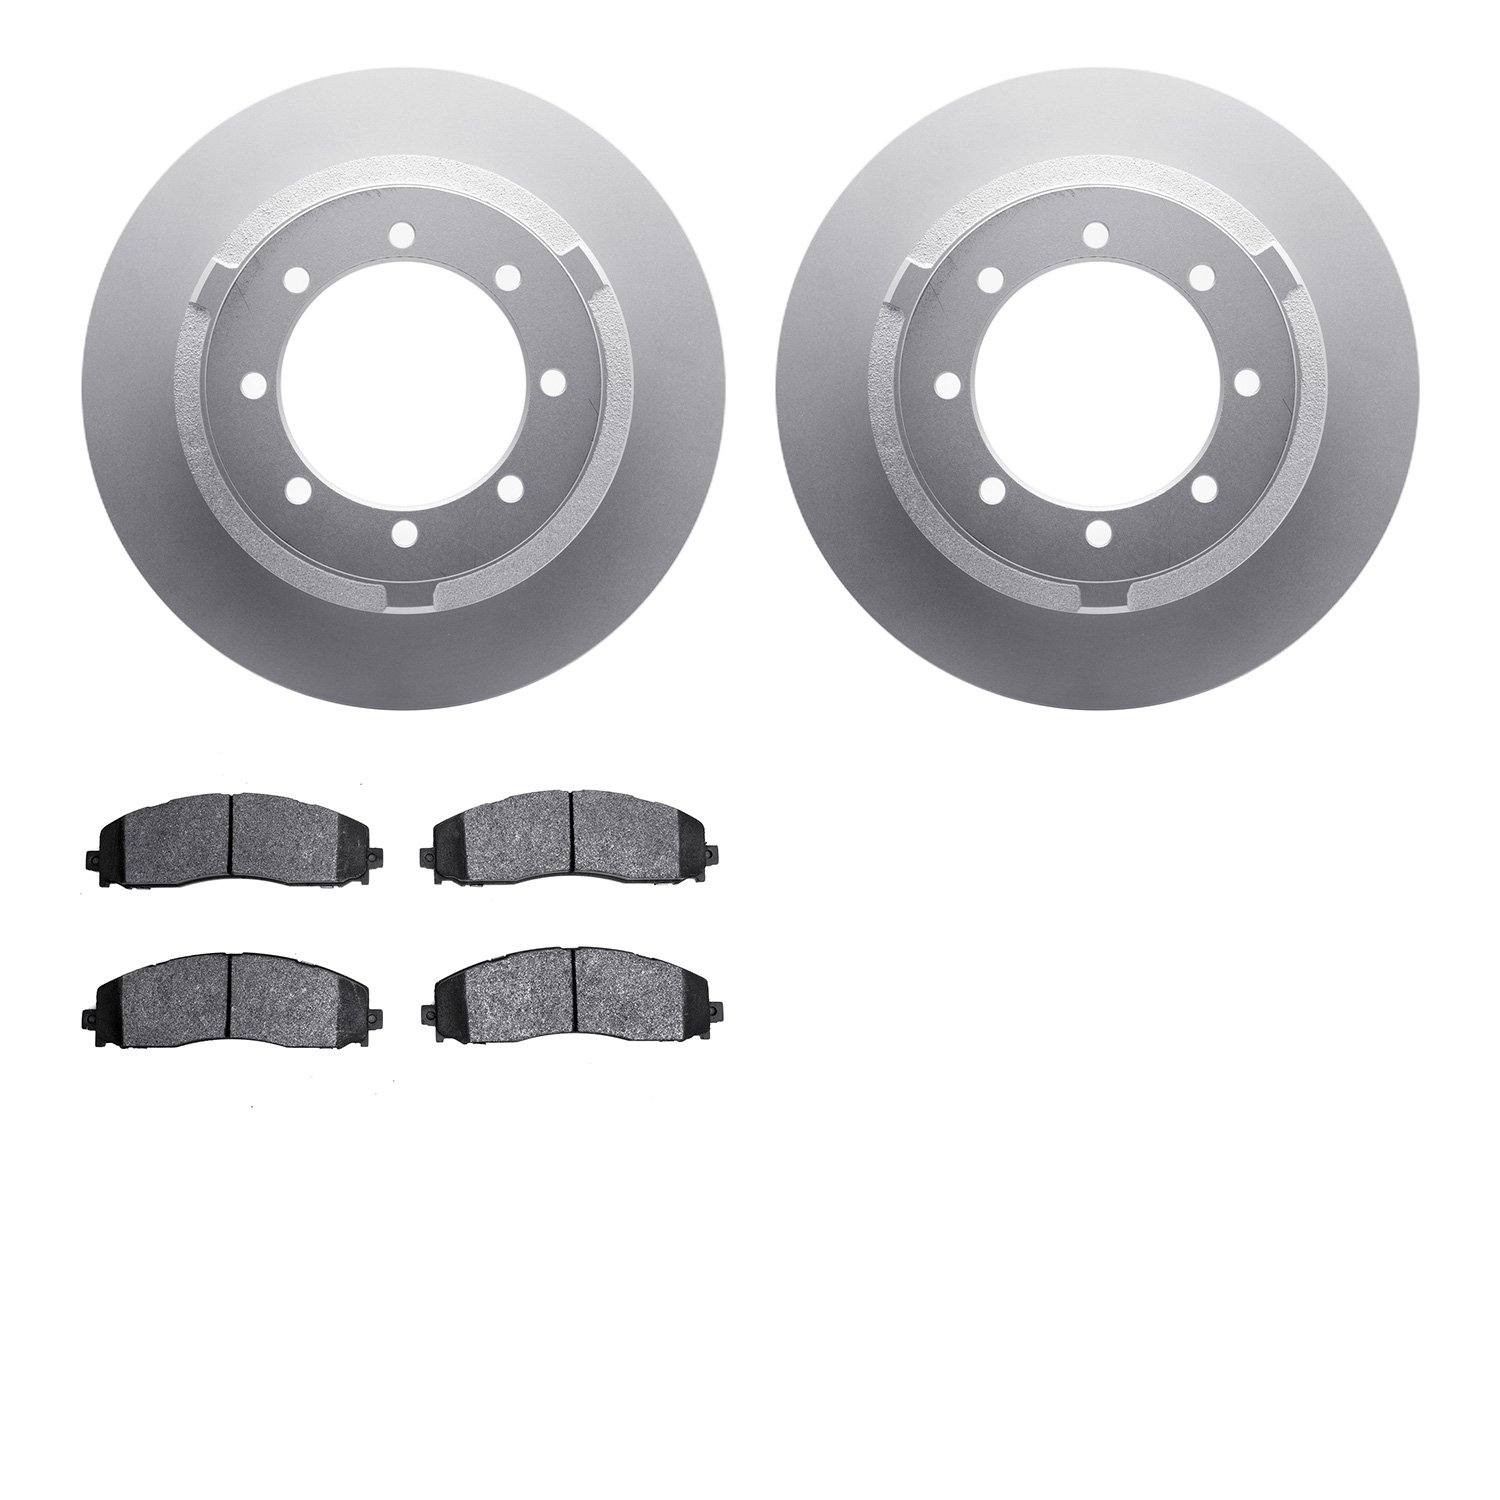 4402-54072 Geospec Brake Rotors with Ultimate-Duty Brake Pads Kit, Fits Select Ford/Lincoln/Mercury/Mazda, Position: Rear